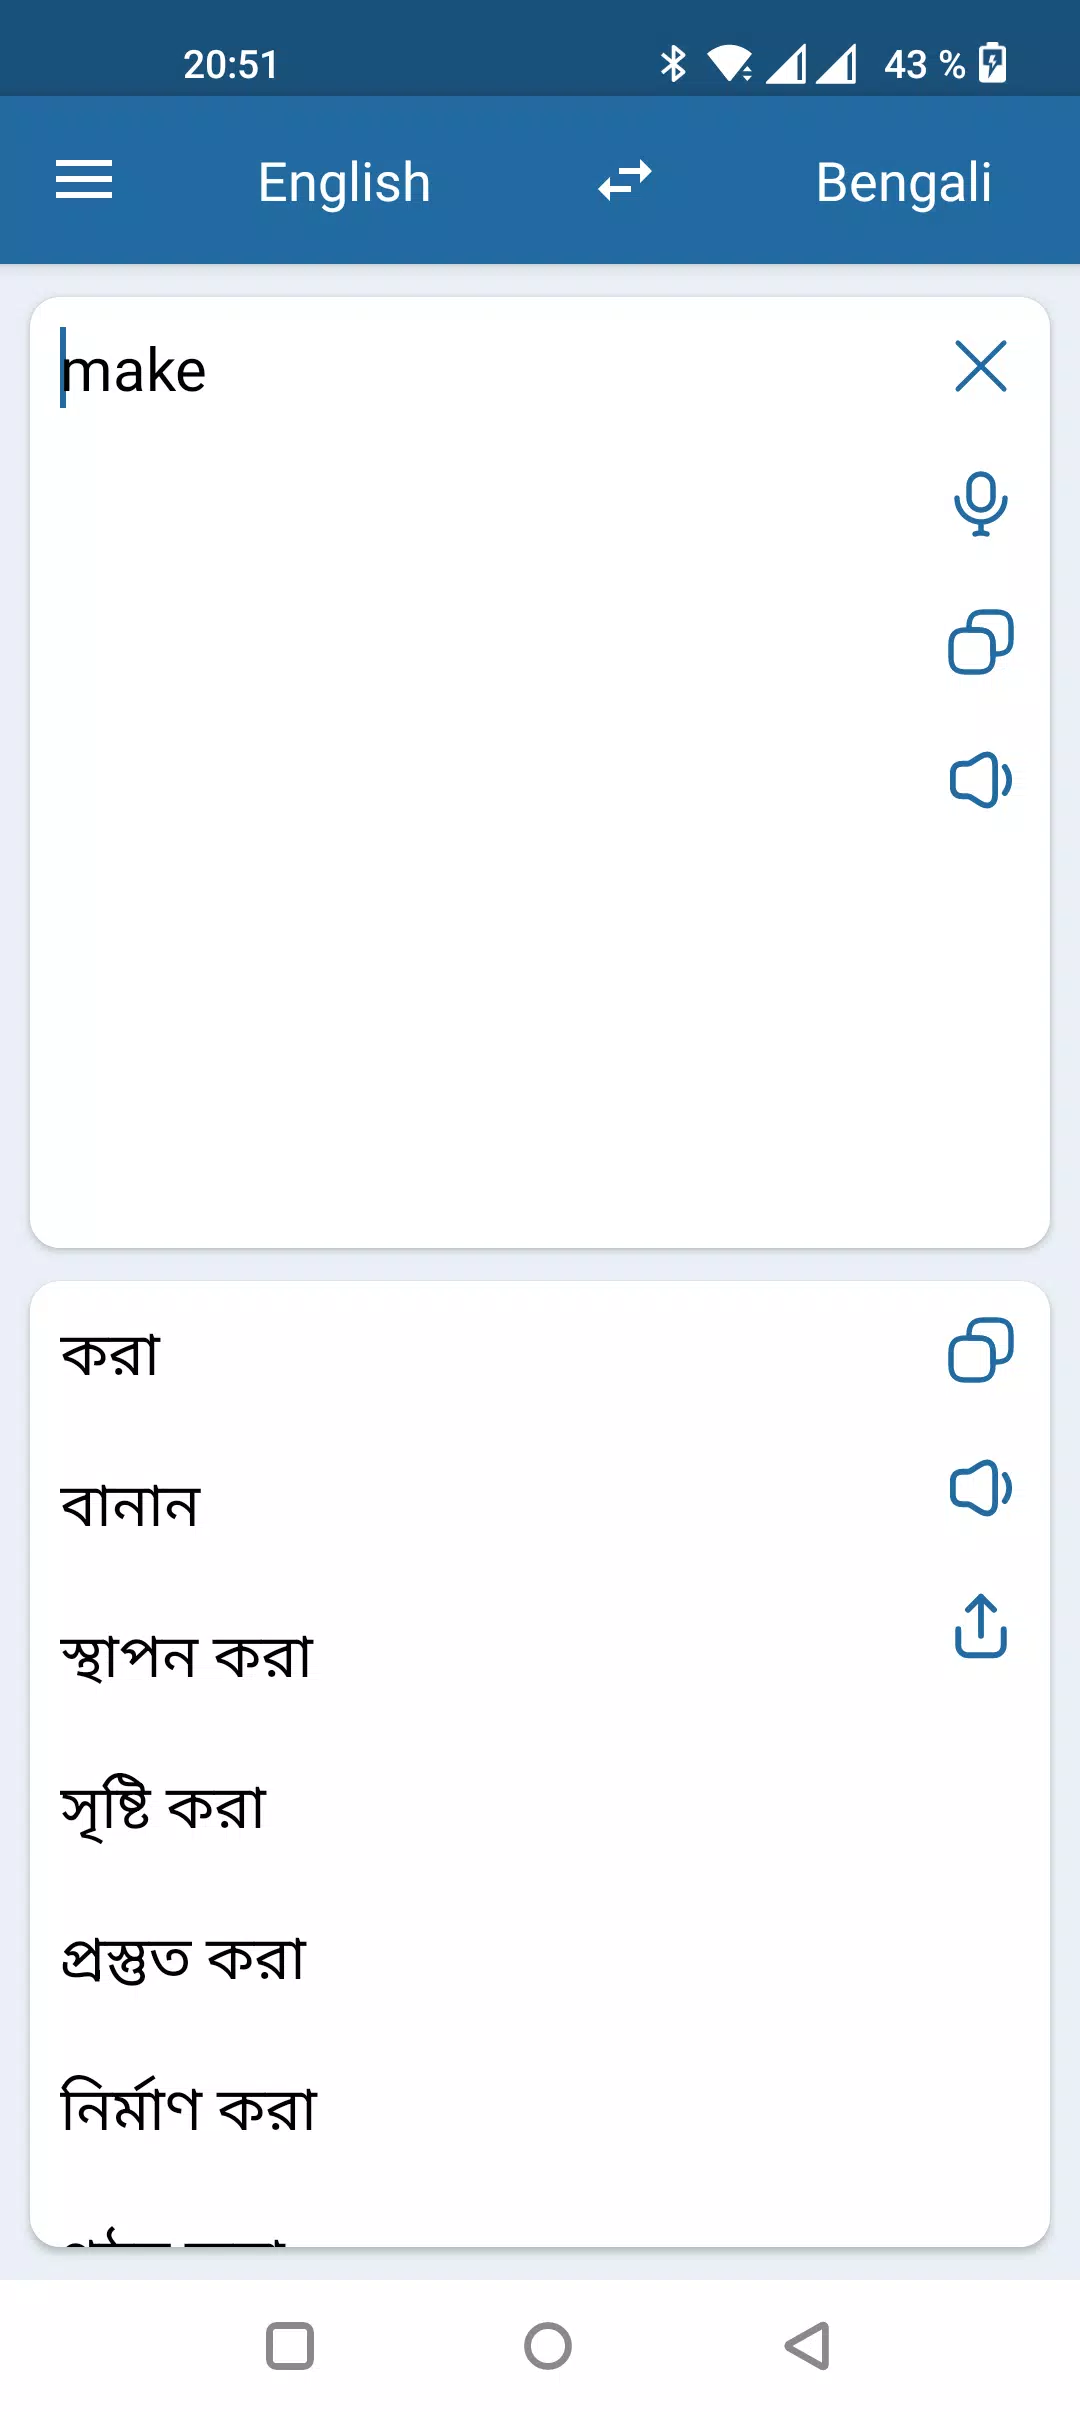 play - Bengali Meaning - play Meaning in Bengali at english-bangla